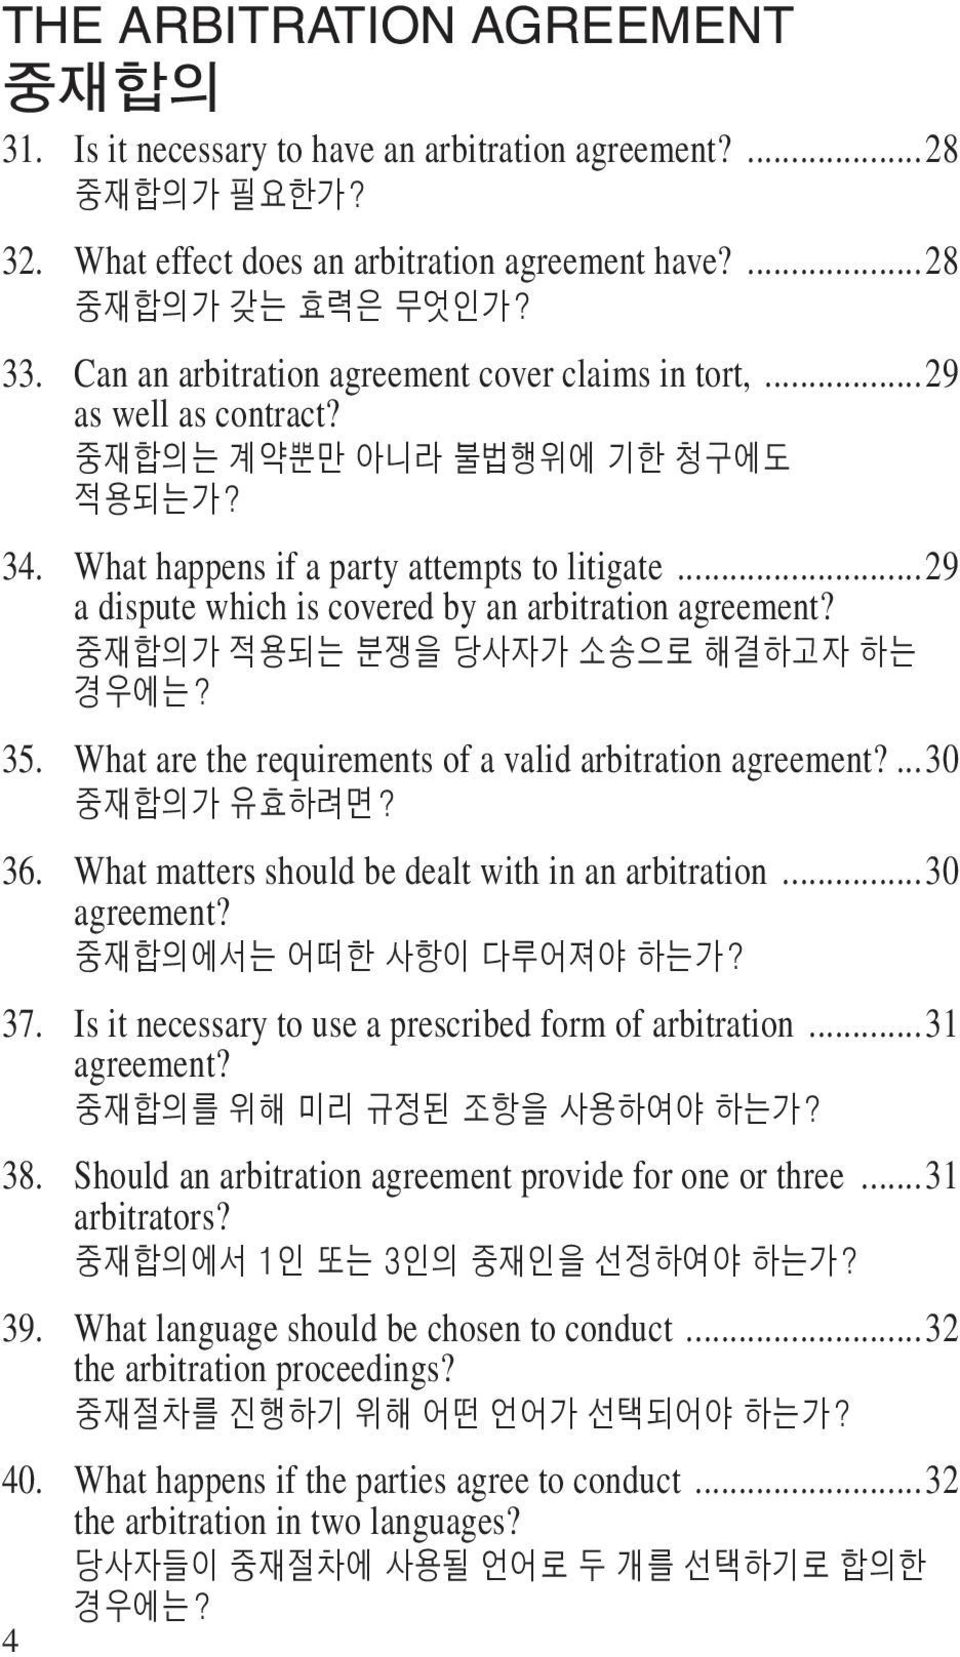 ..29 a dispute which is covered by an arbitration agreement? 중재합의가 적용되는 분쟁을 당사자가 소송으로 해결하고자 하는 경우에는? 35. What are the requirements of a valid arbitration agreement?... 30 중재합의가 유효하려면? 36.